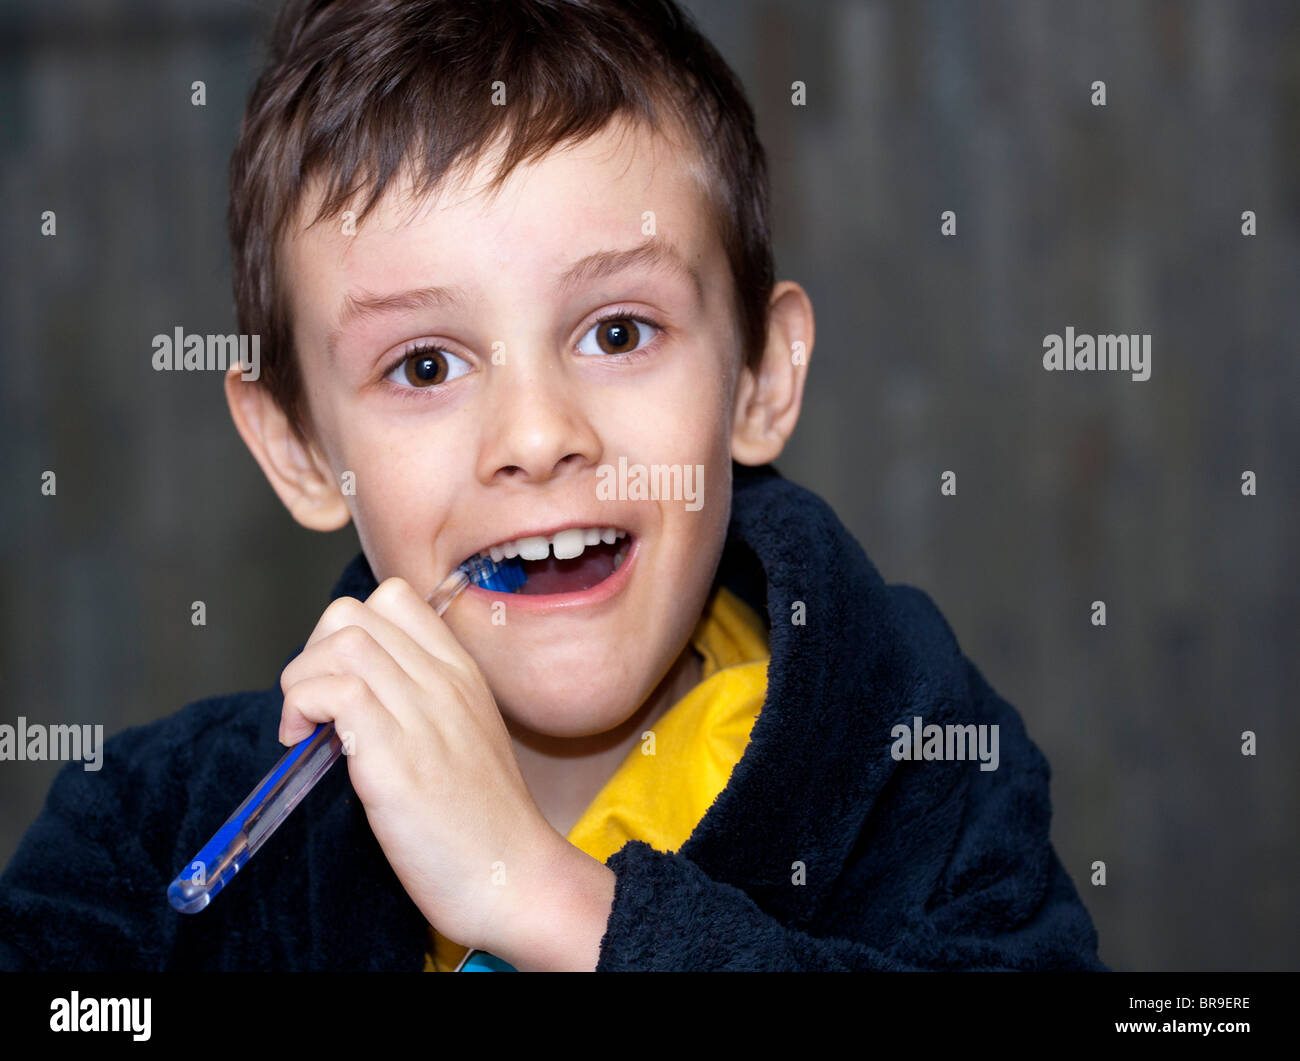 A young boy (5 years old) brushes his teeth in a robe. Stock Photo